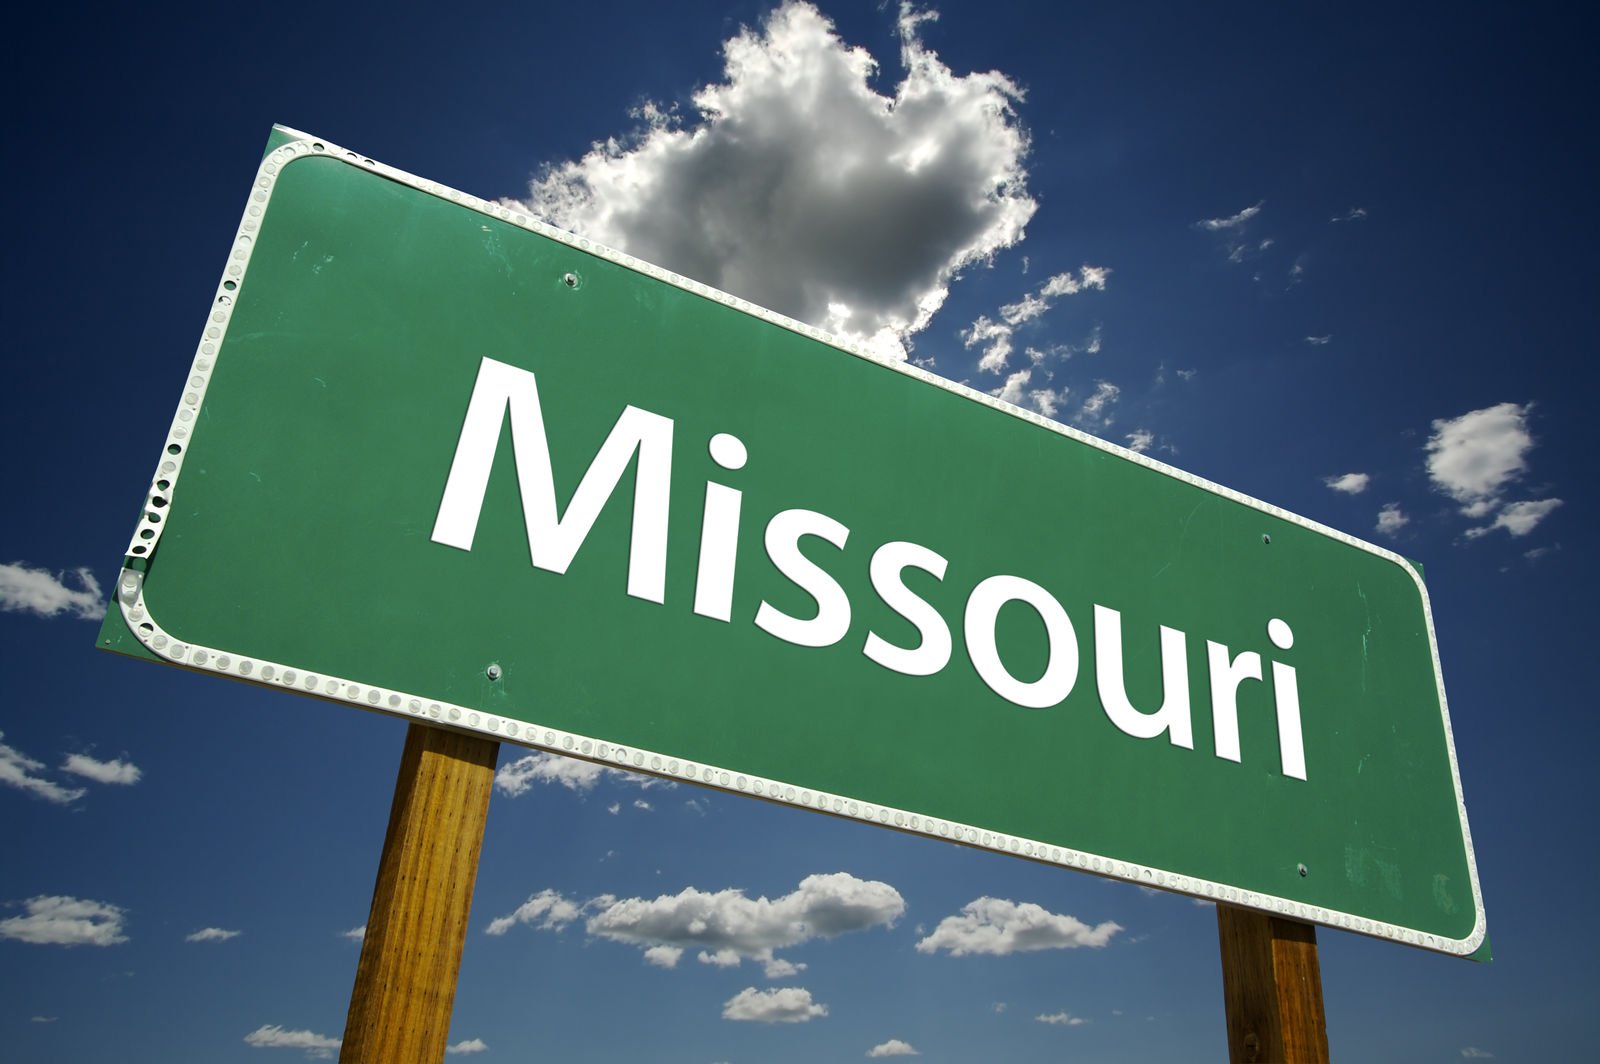 What are the full glass coverage laws in Missouri?